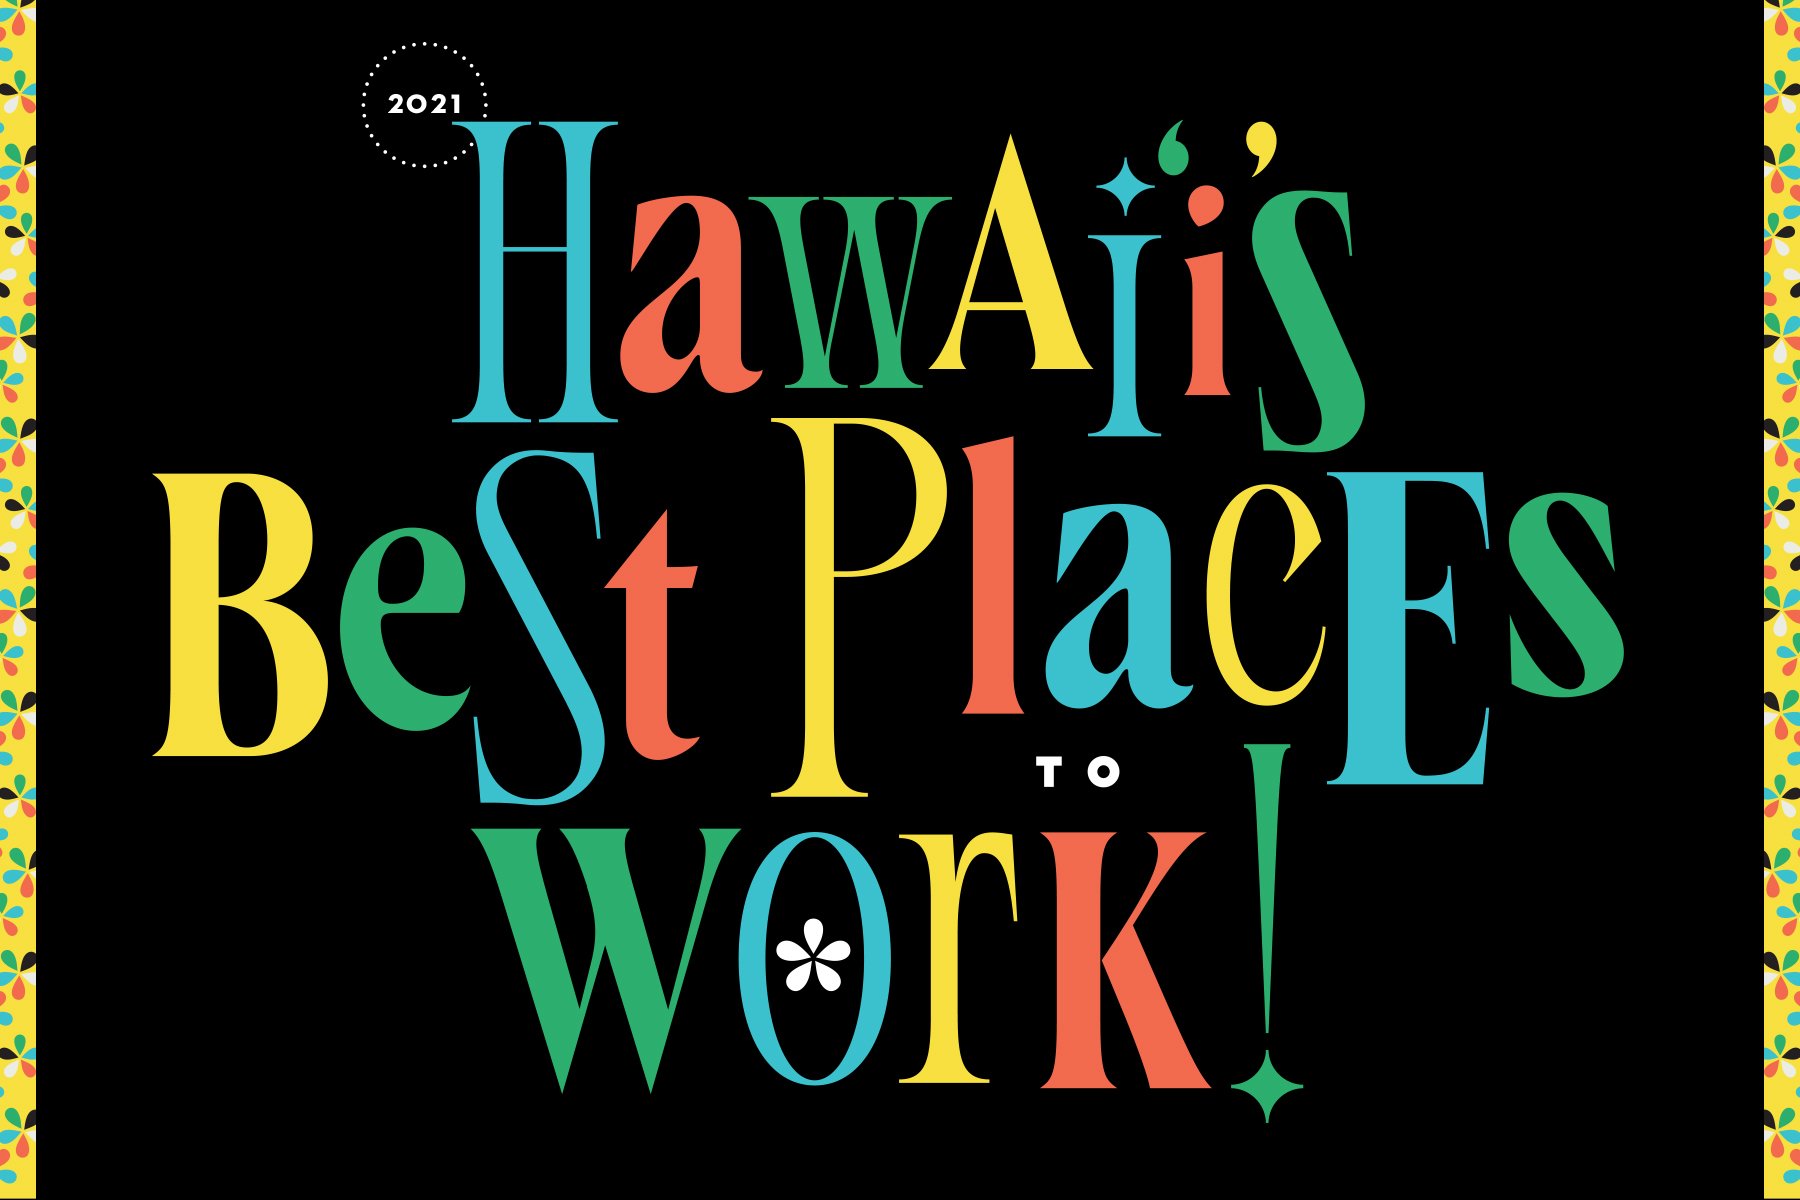 Hawai‘i’s Best Places to Work 2021 - Hawaii Business Magazine